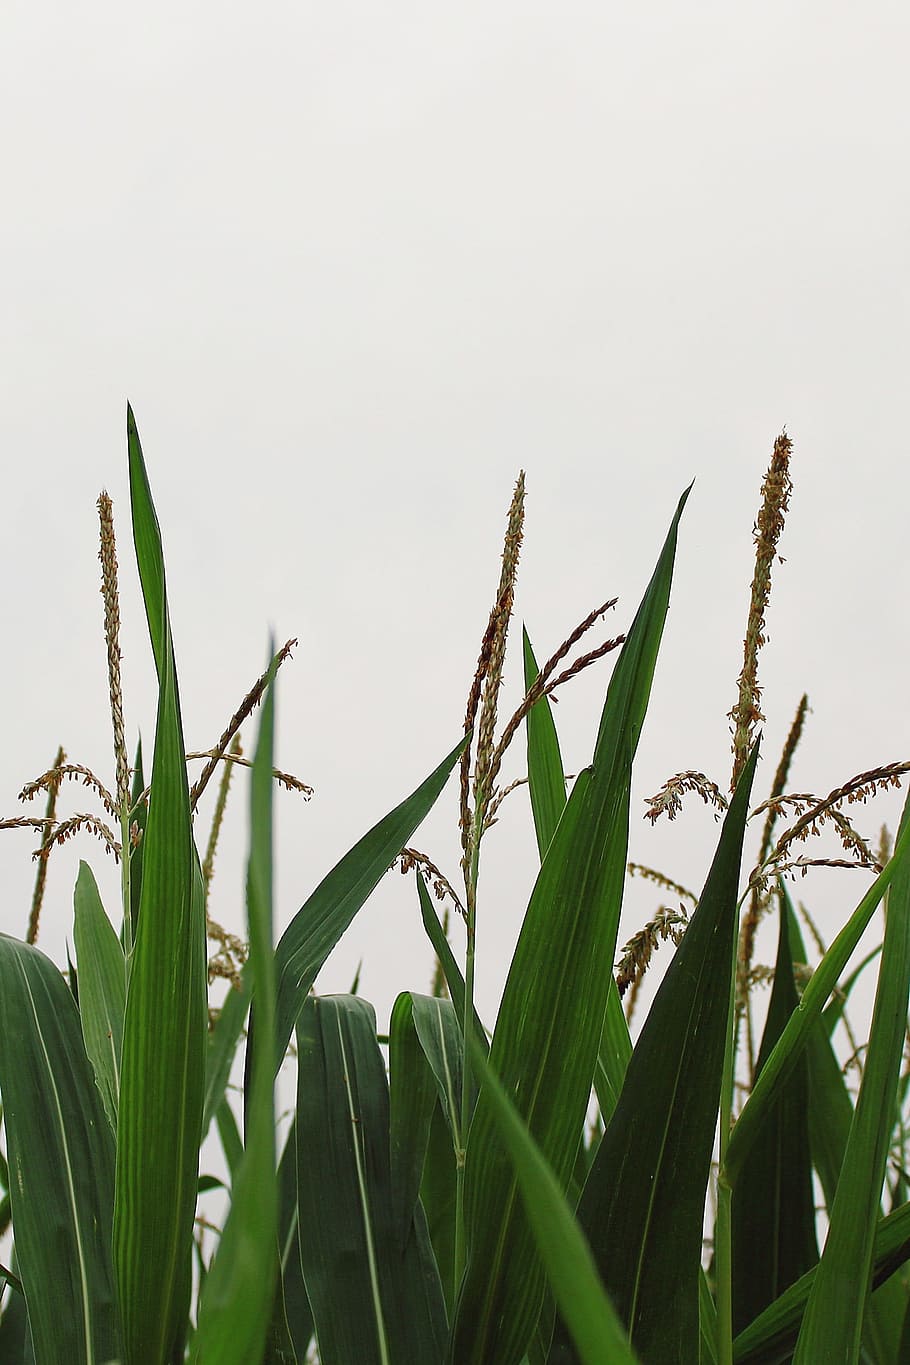 Corn, Cornfield, Agriculture, Field, plant, green, fodder maize, cereals, nature, leaves